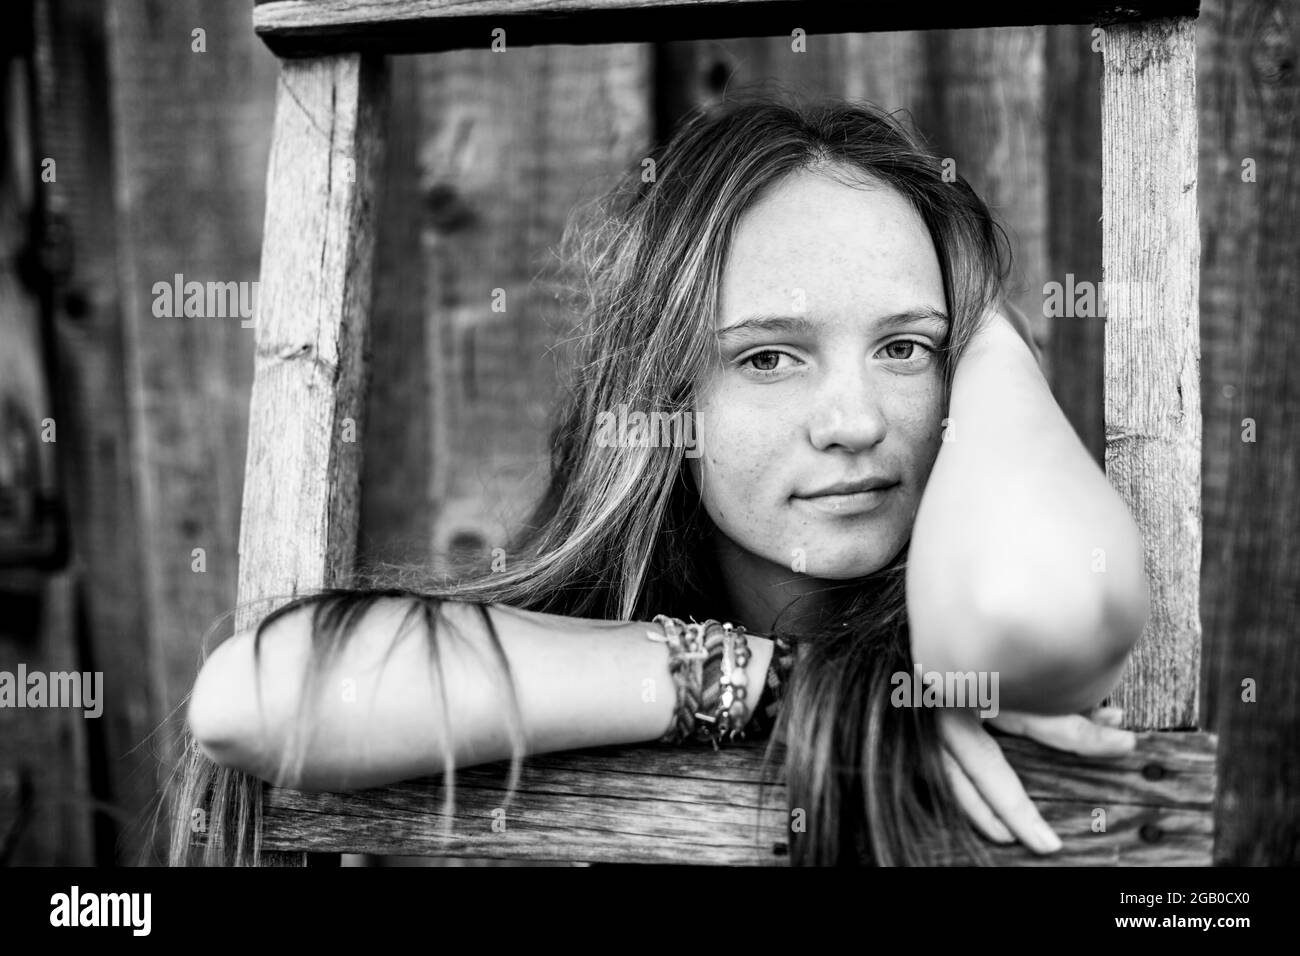 Cute girl portrait with hippie jewelry in rural surroundings, close-up. Black and white photo. Stock Photo